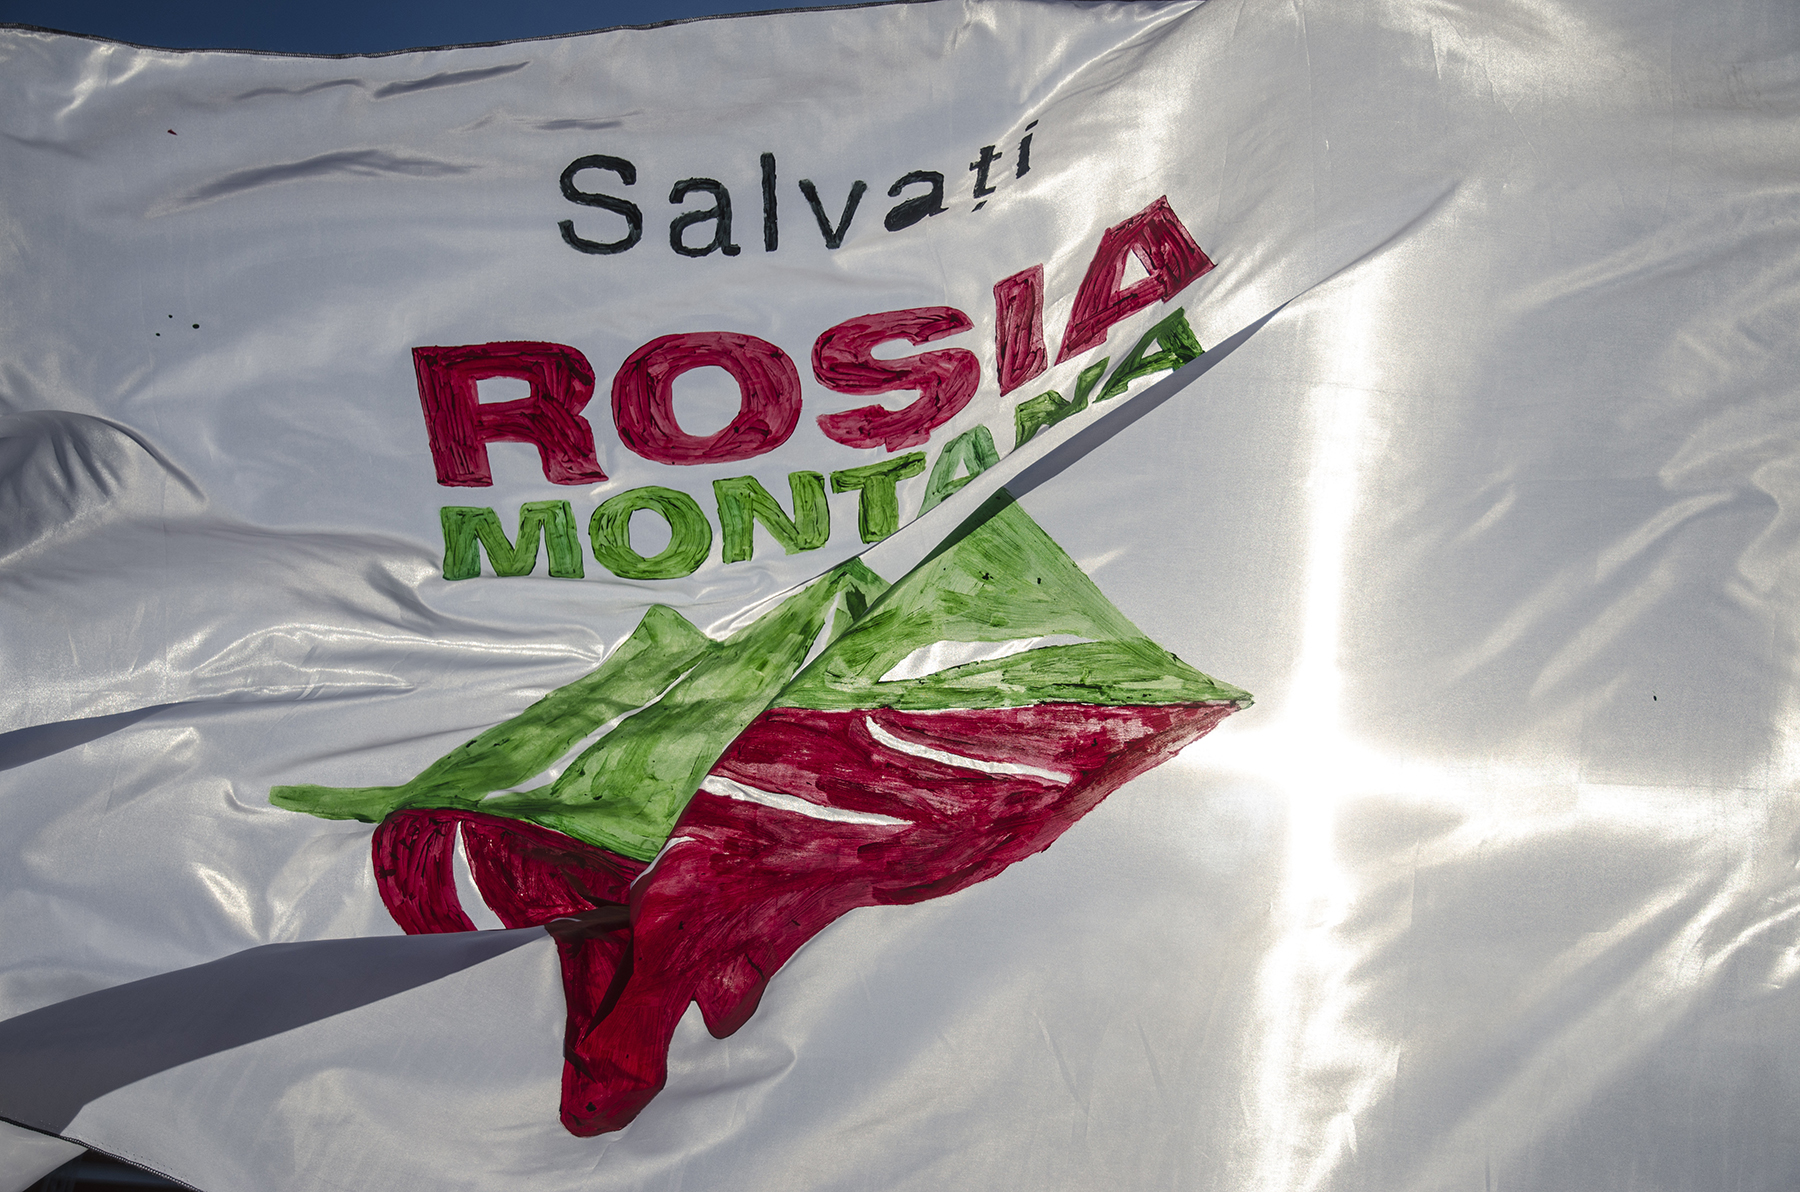 The logo of the Save Rosia Montana campaign was hand-drawn on thousands of banners.